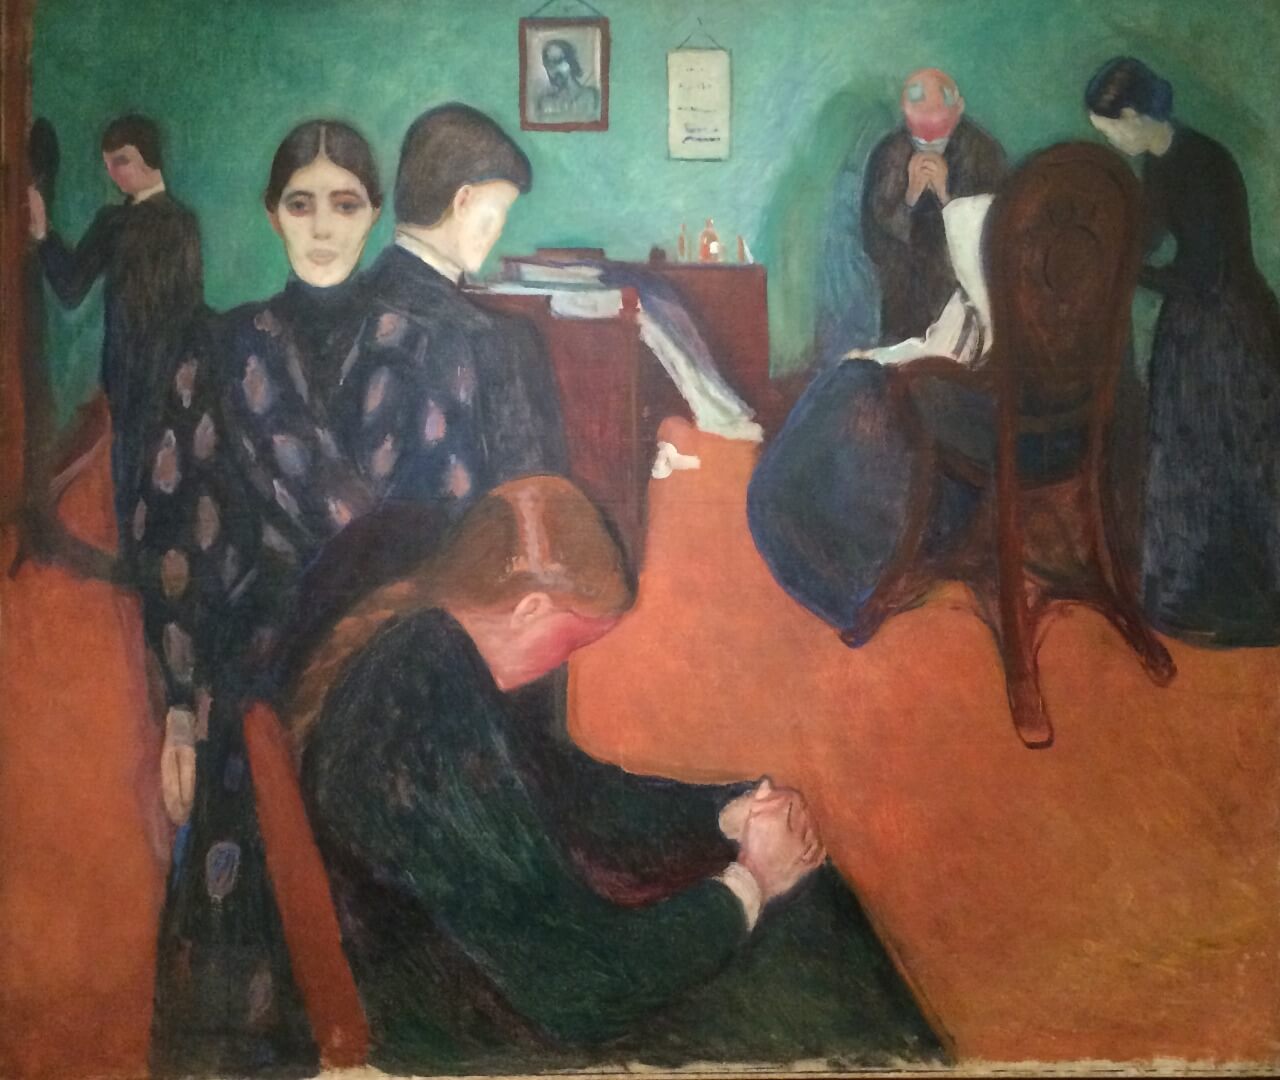 1_Edvard Munch, Death in the Sick Room, 1893